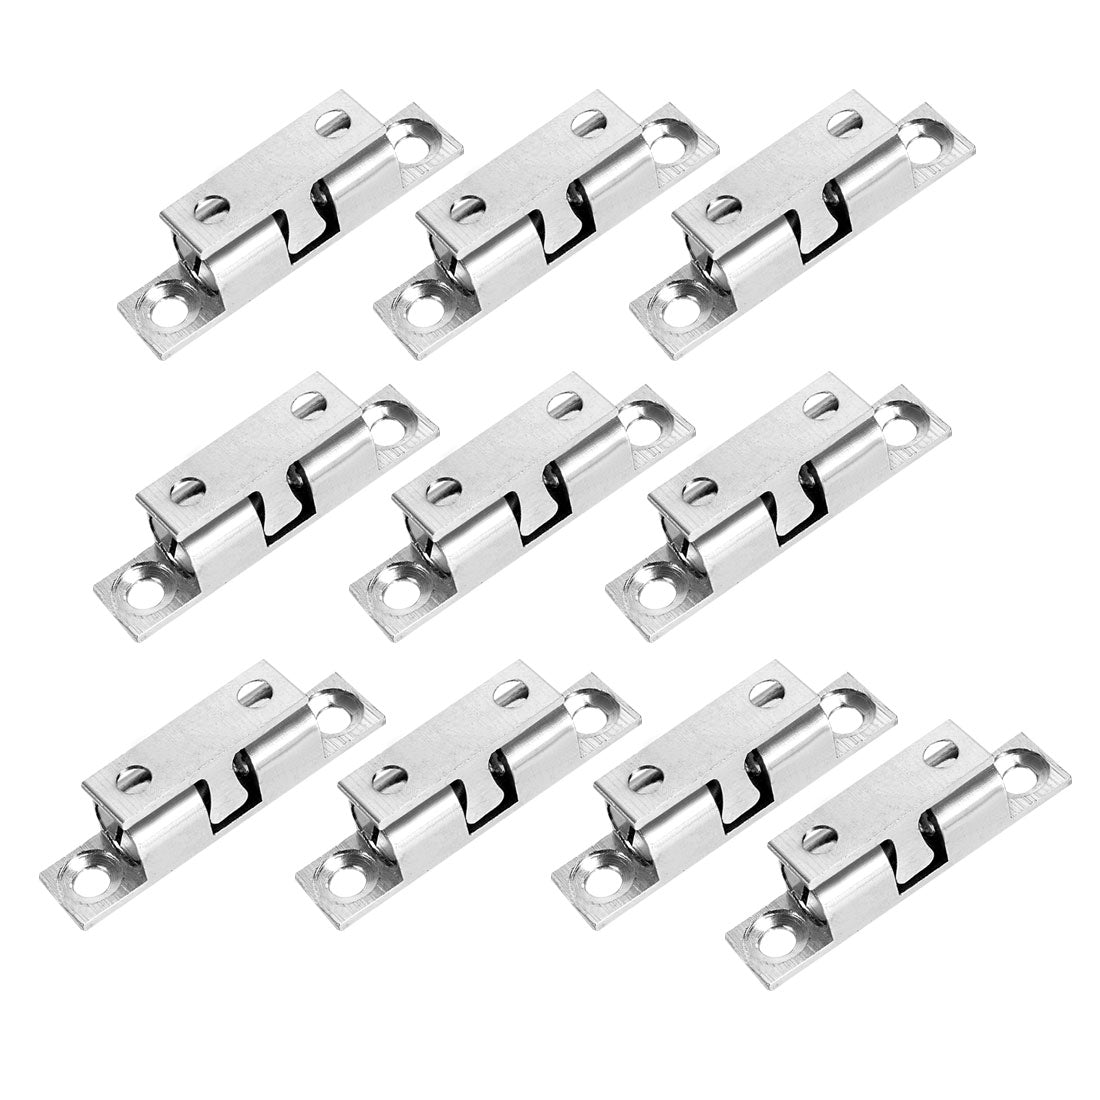 uxcell Uxcell 10pcs Cabinet Door Closet Brass Double Ball Catch Tension Latch 40mm Length Silver Tone